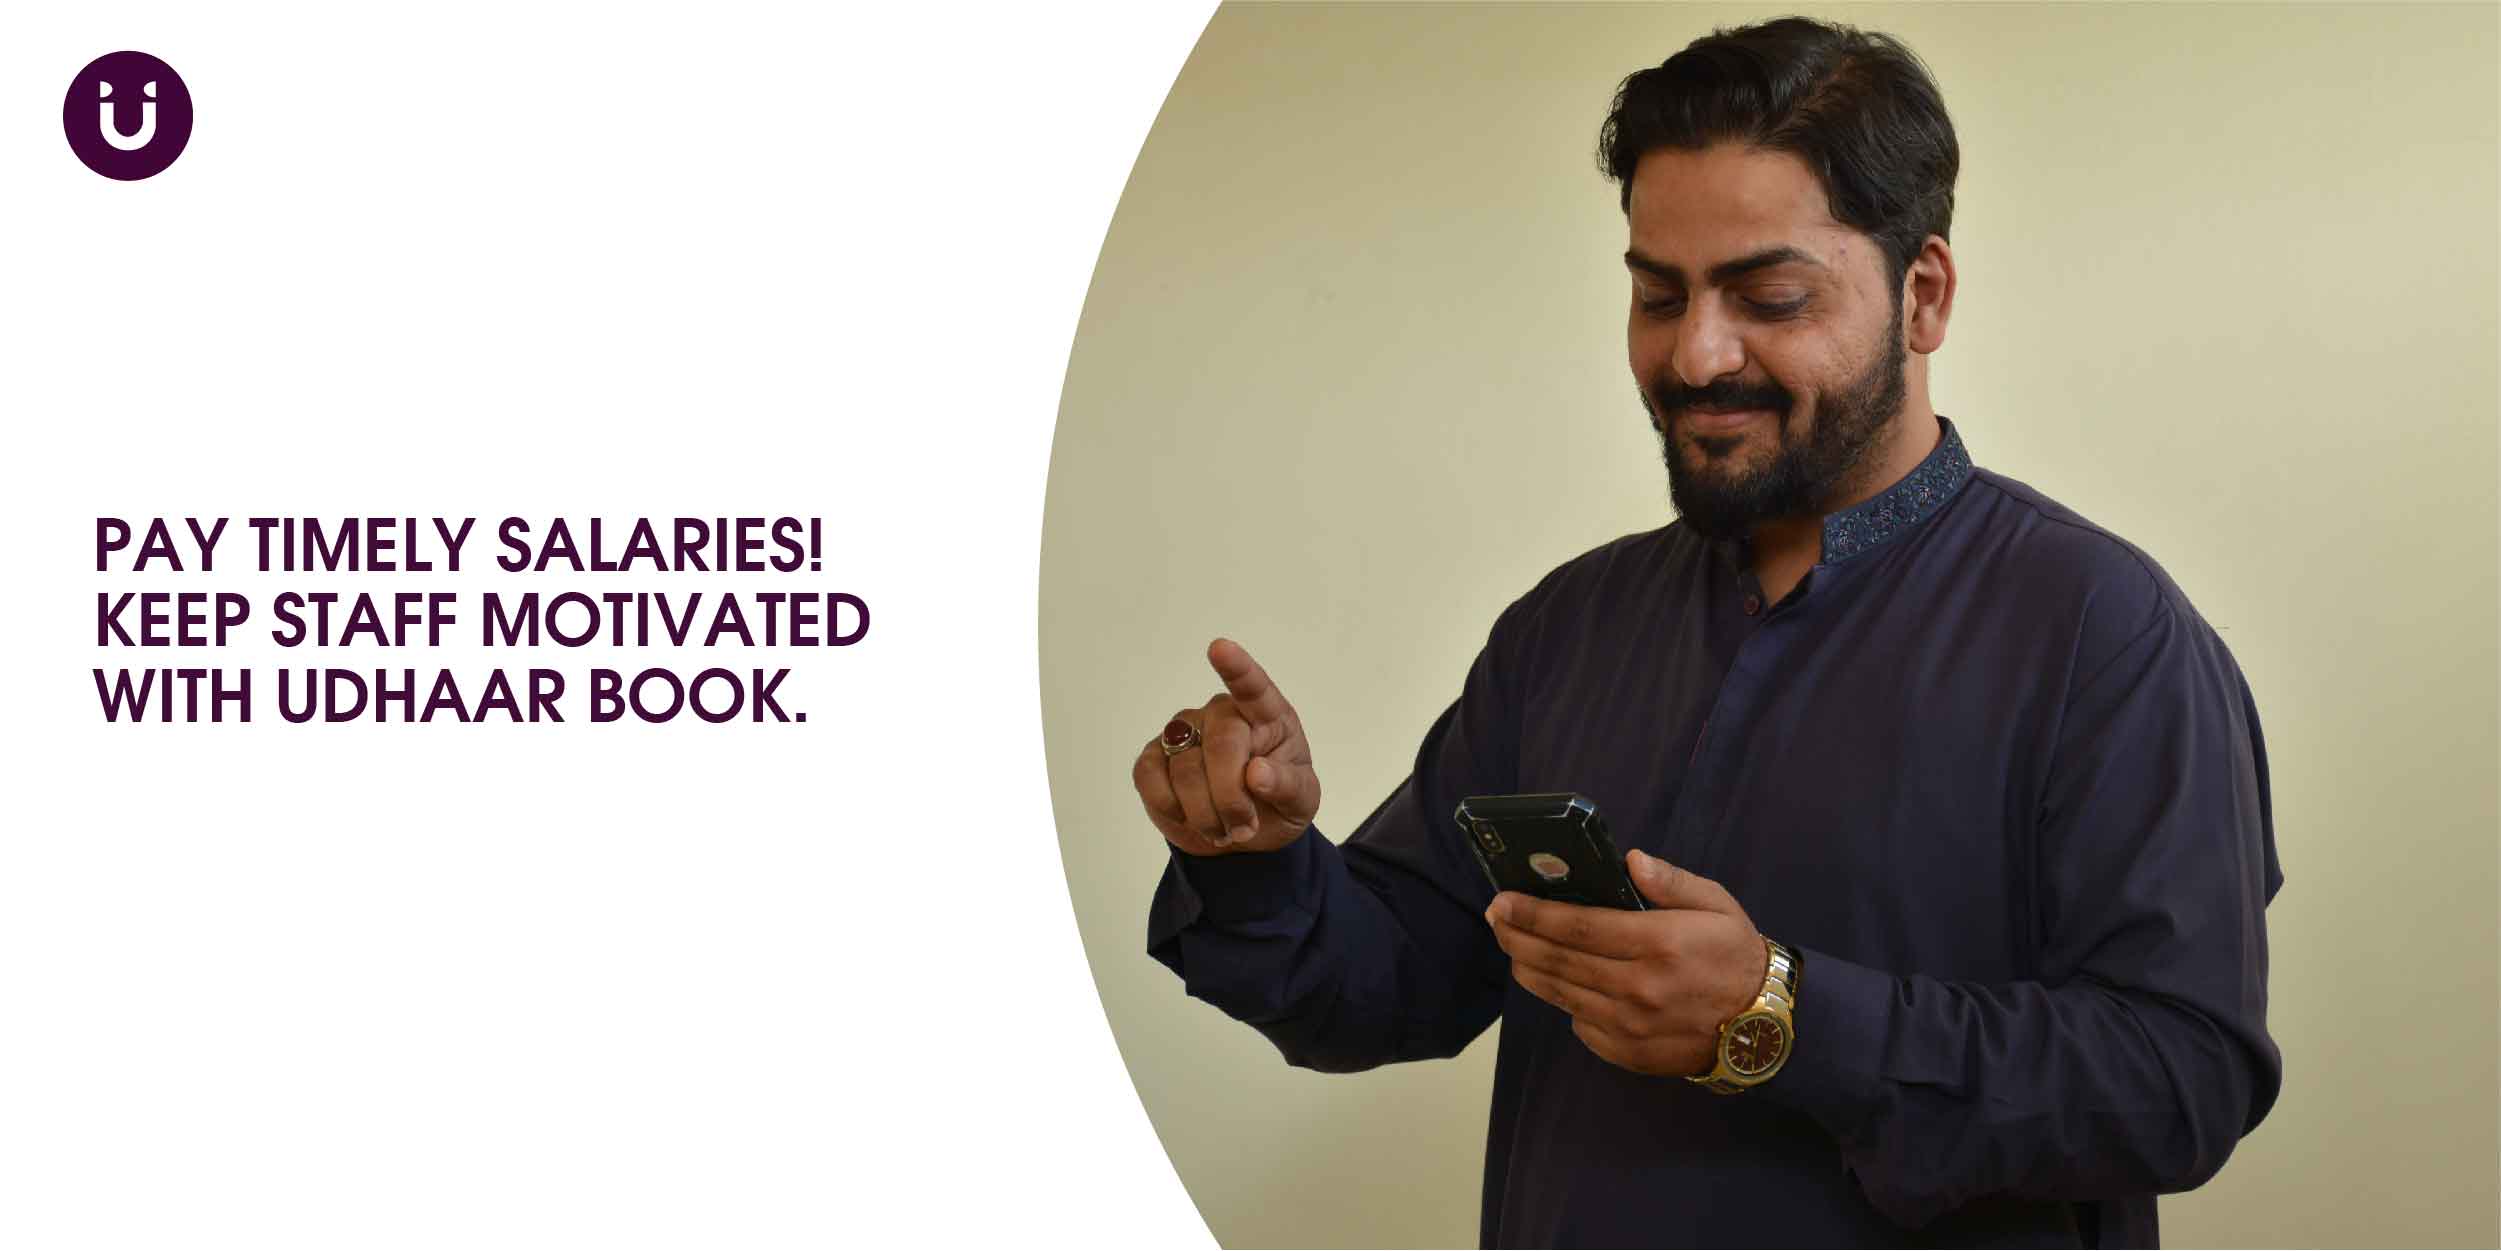 Pay Timely Salaries! Keep Staff Motivated with Udhaar Book.